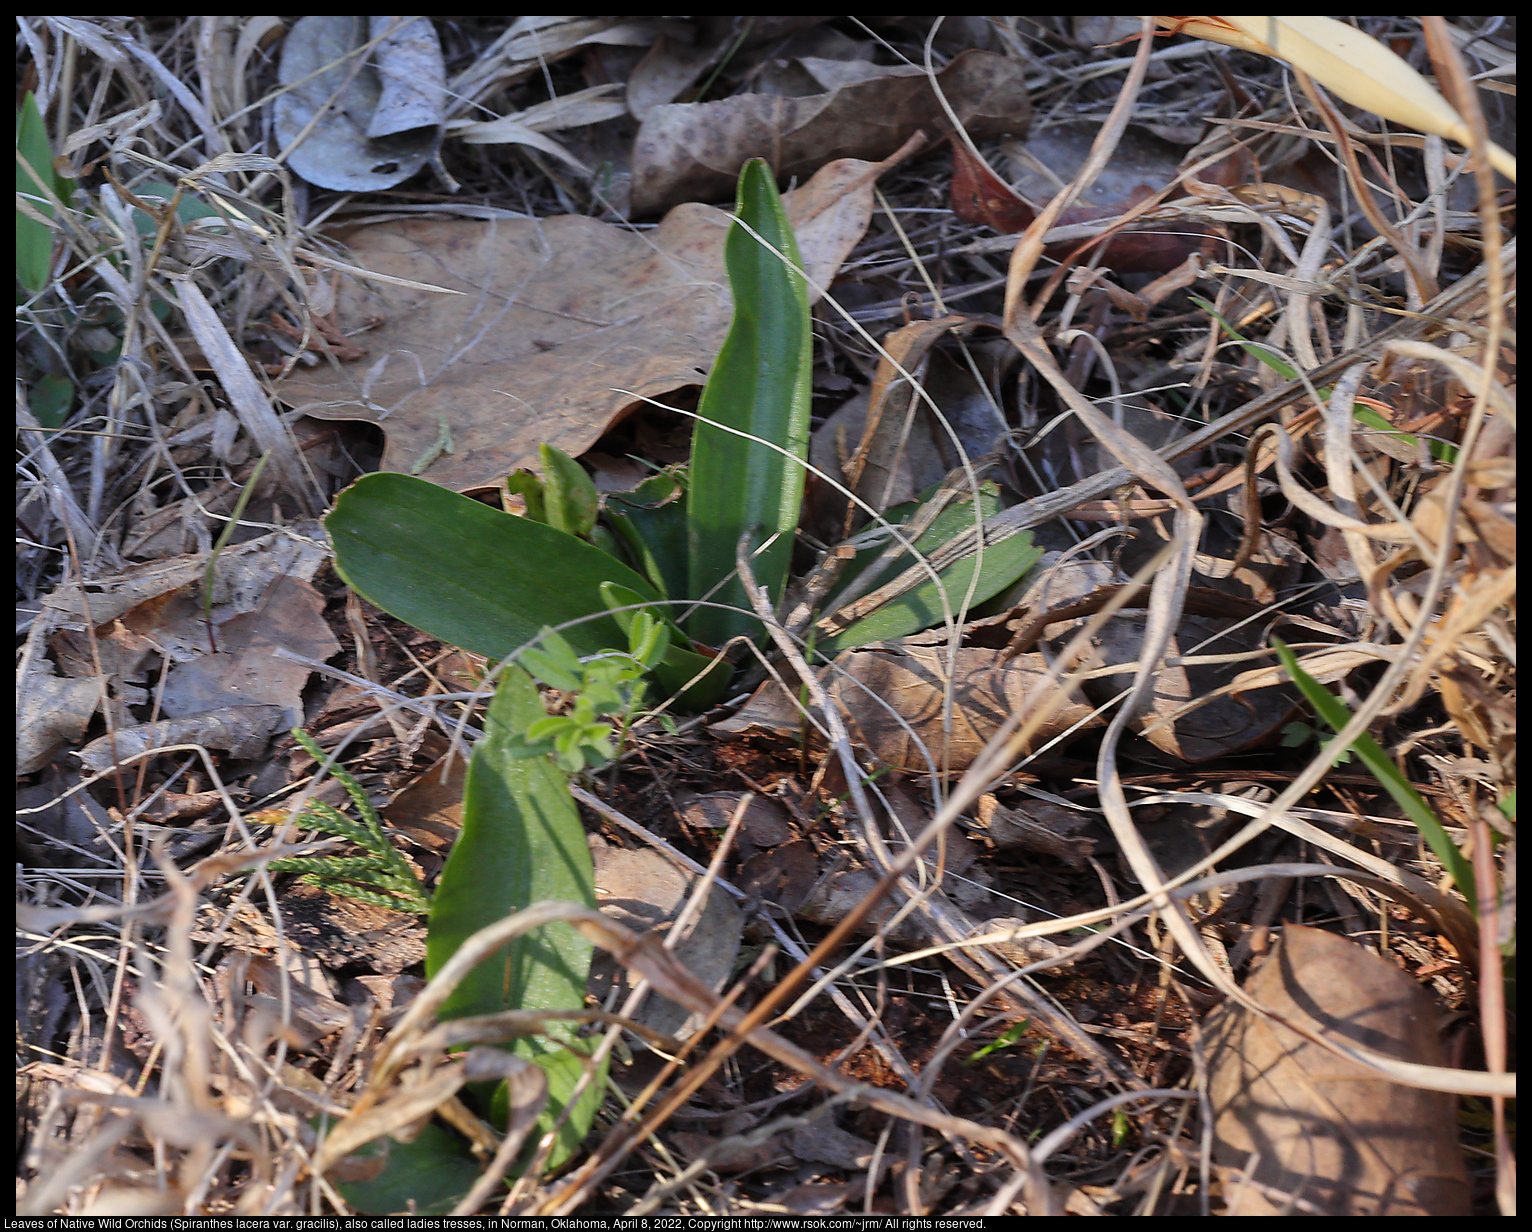 Leaves of Native Wild Orchids (Spiranthes lacera var. gracilis), also called ladies tresses, in Norman, Oklahoma, April 8, 2022